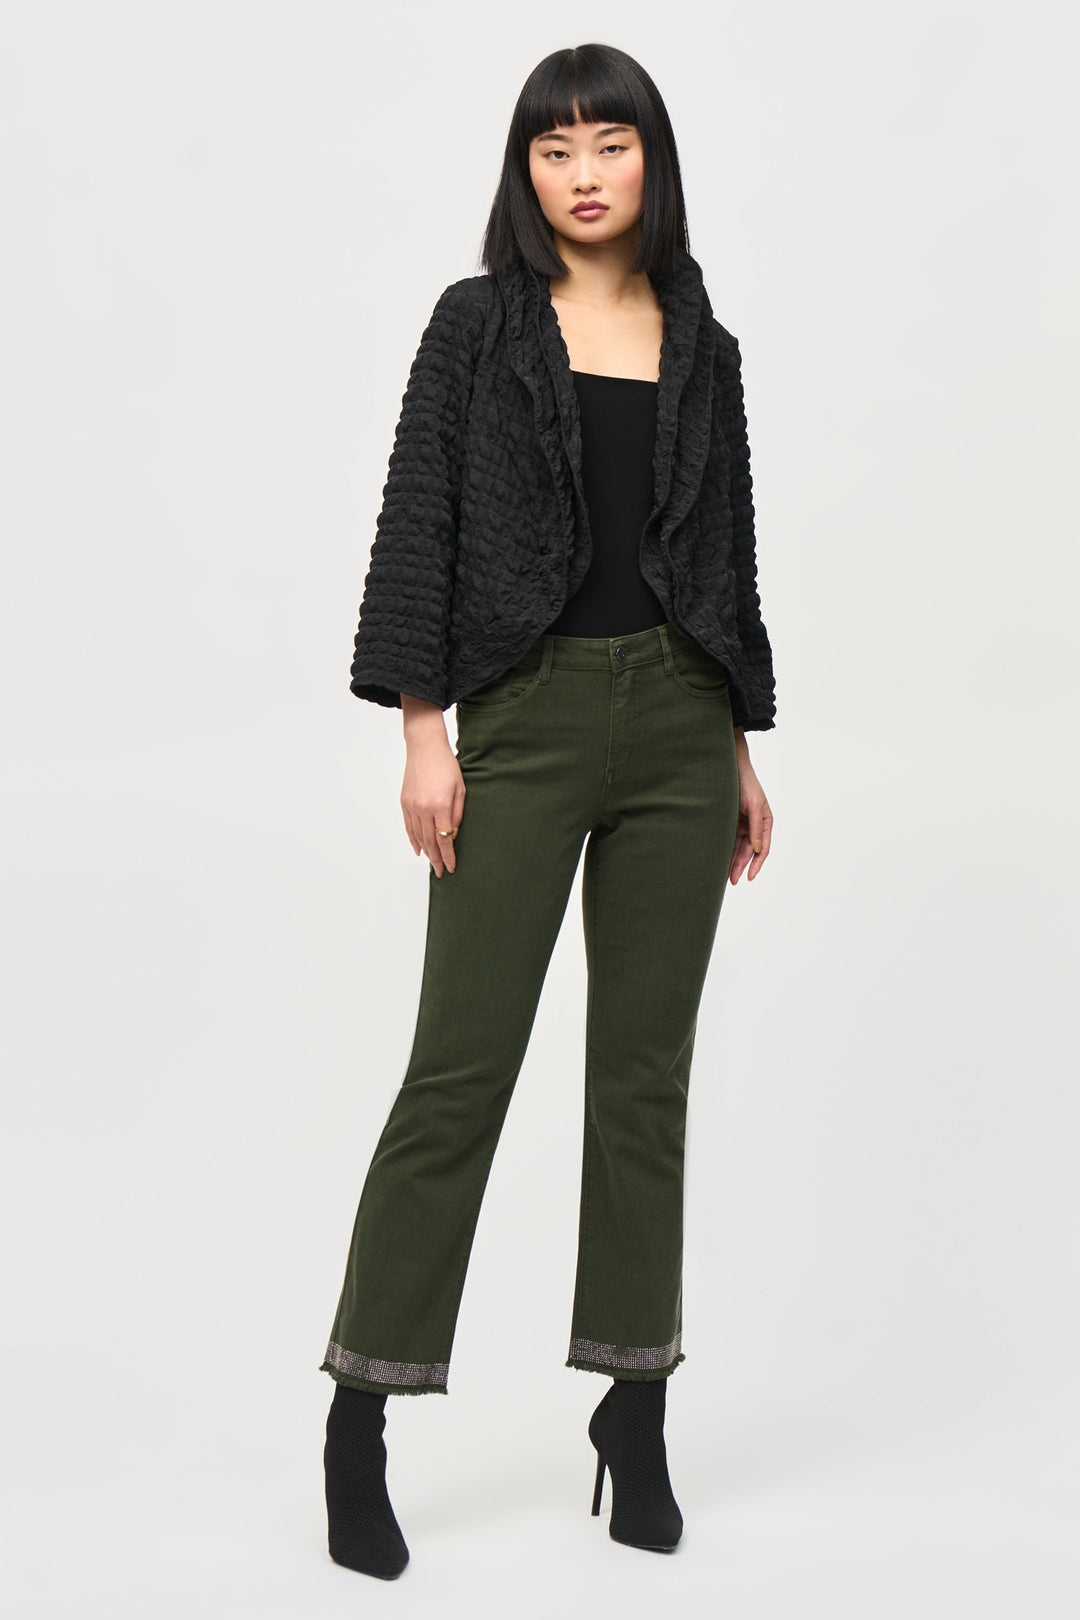 Joseph Ribkoff Fall 2024 They are a classic straight fit. The bling frayed hems are what make these jeans standout from the crowd!